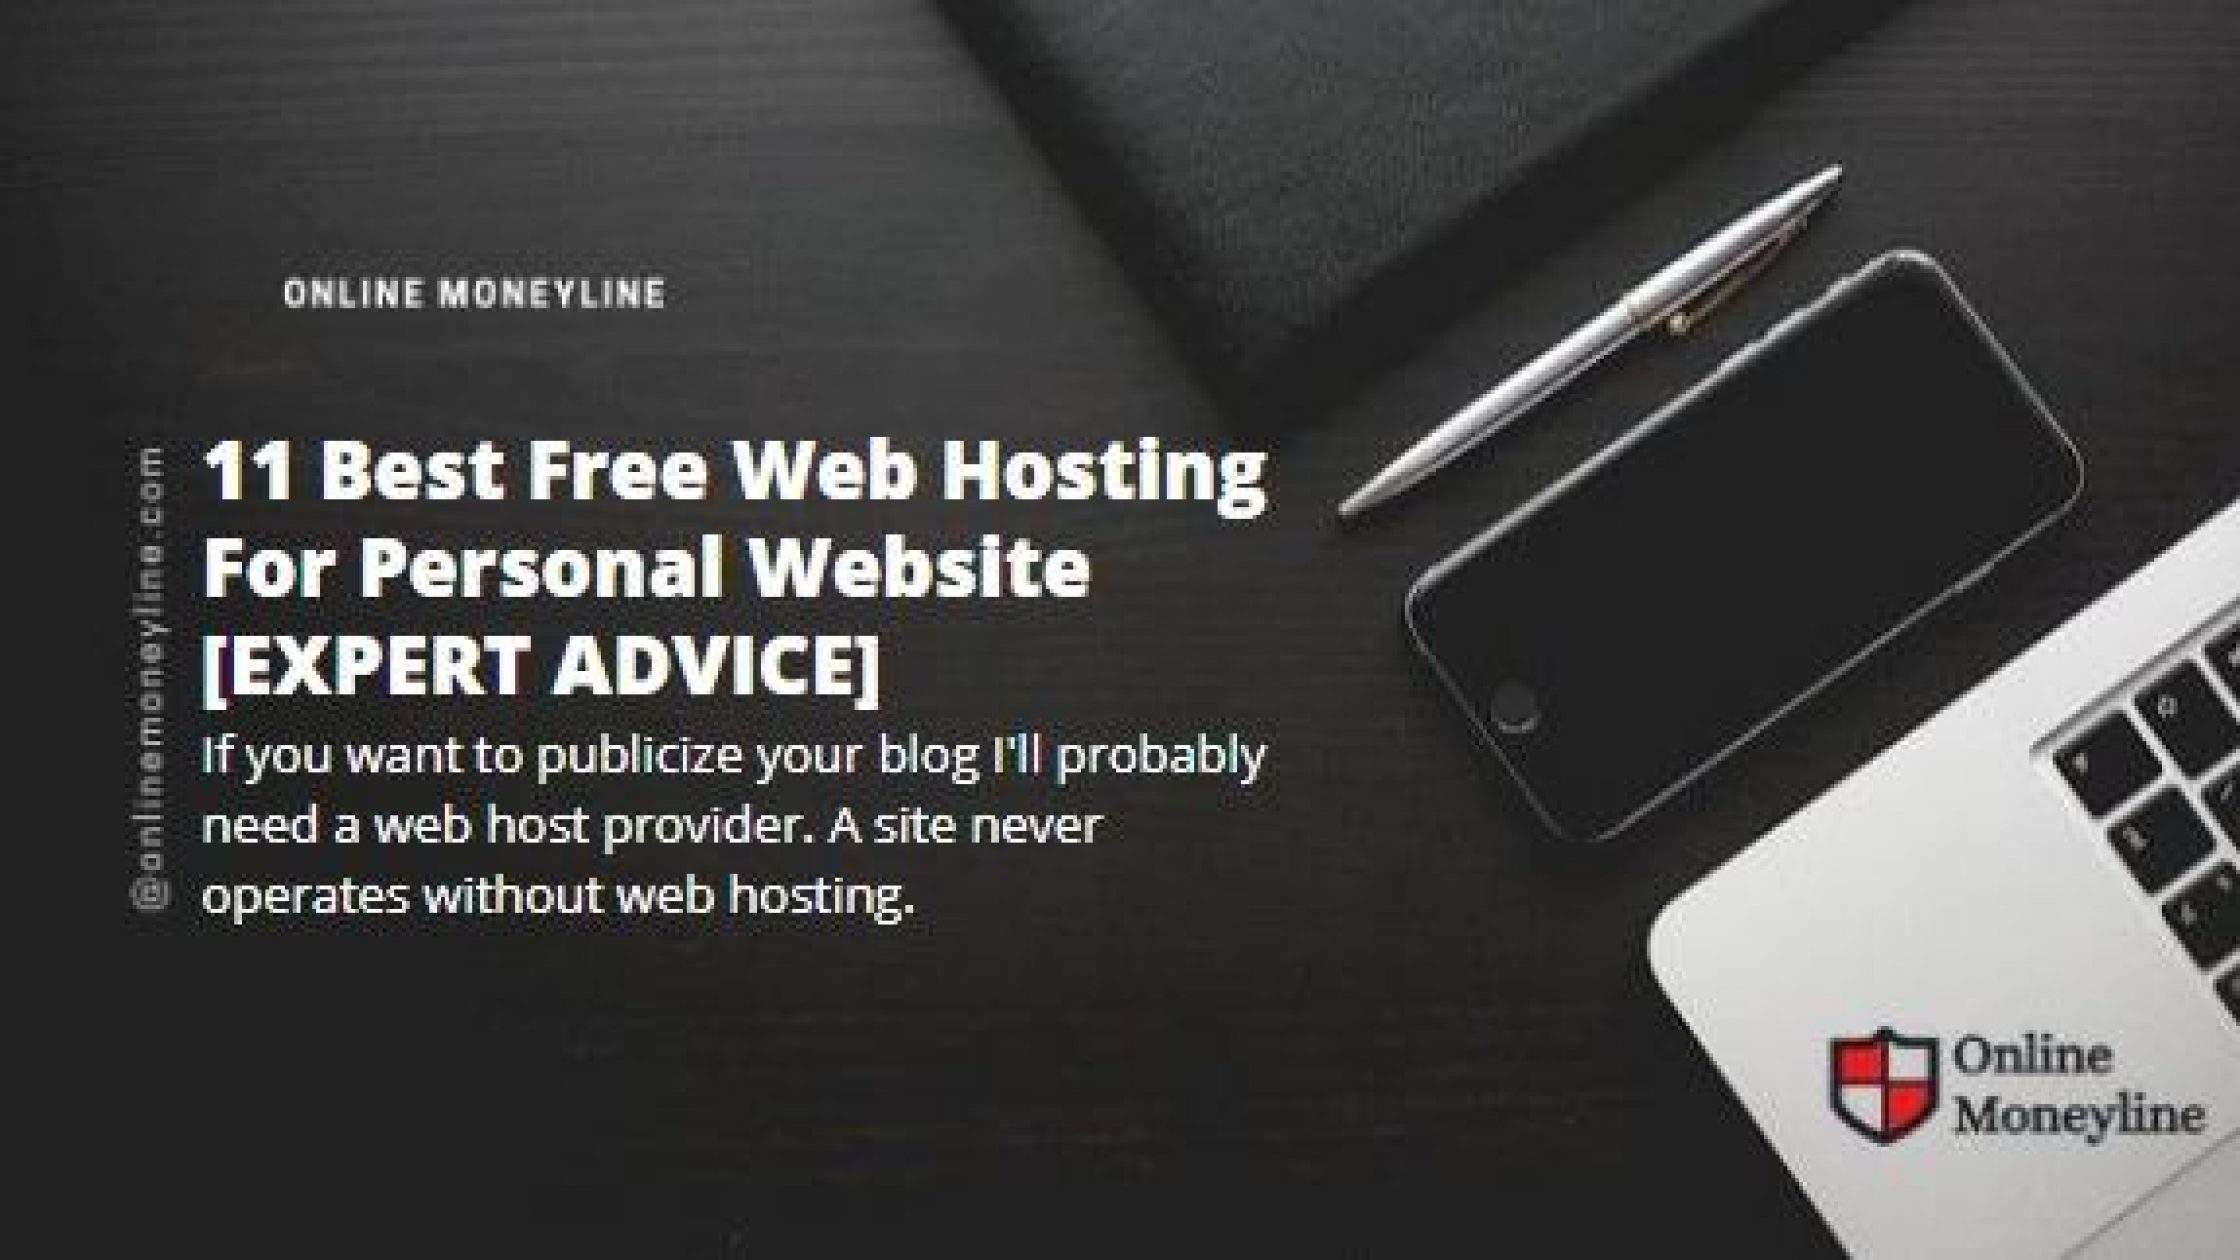 11 Best Free Web Hosting For Personal Website [EXPERT ADVICE]